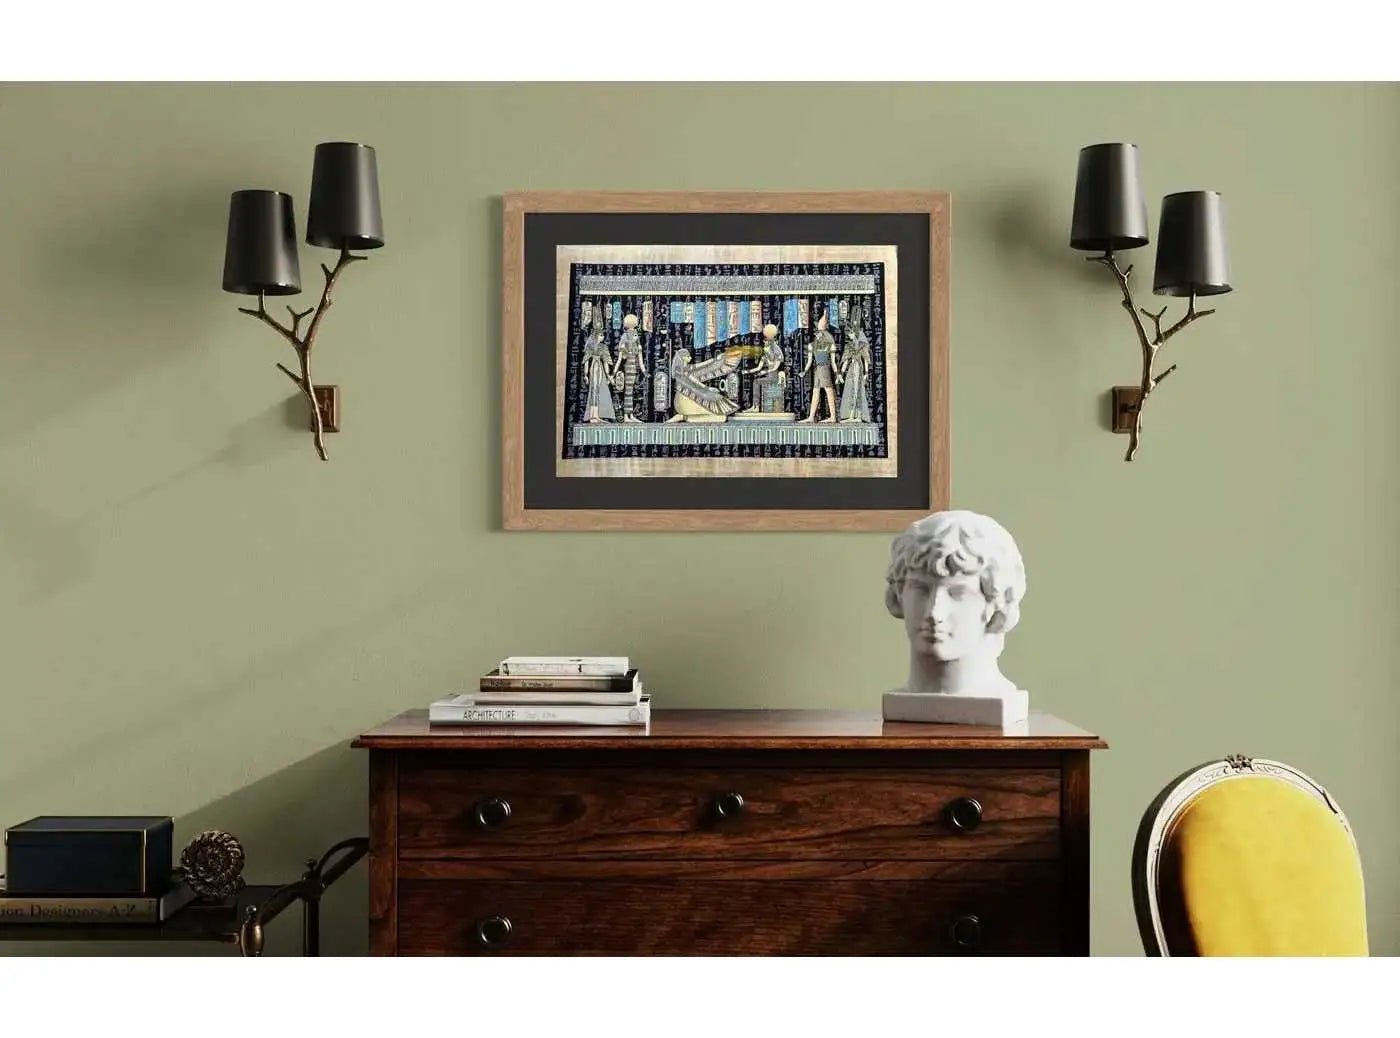 Glow In Dark Wall Decor Horus Leading Nefertari into the Afterlife & Goddesses Isis and Maat